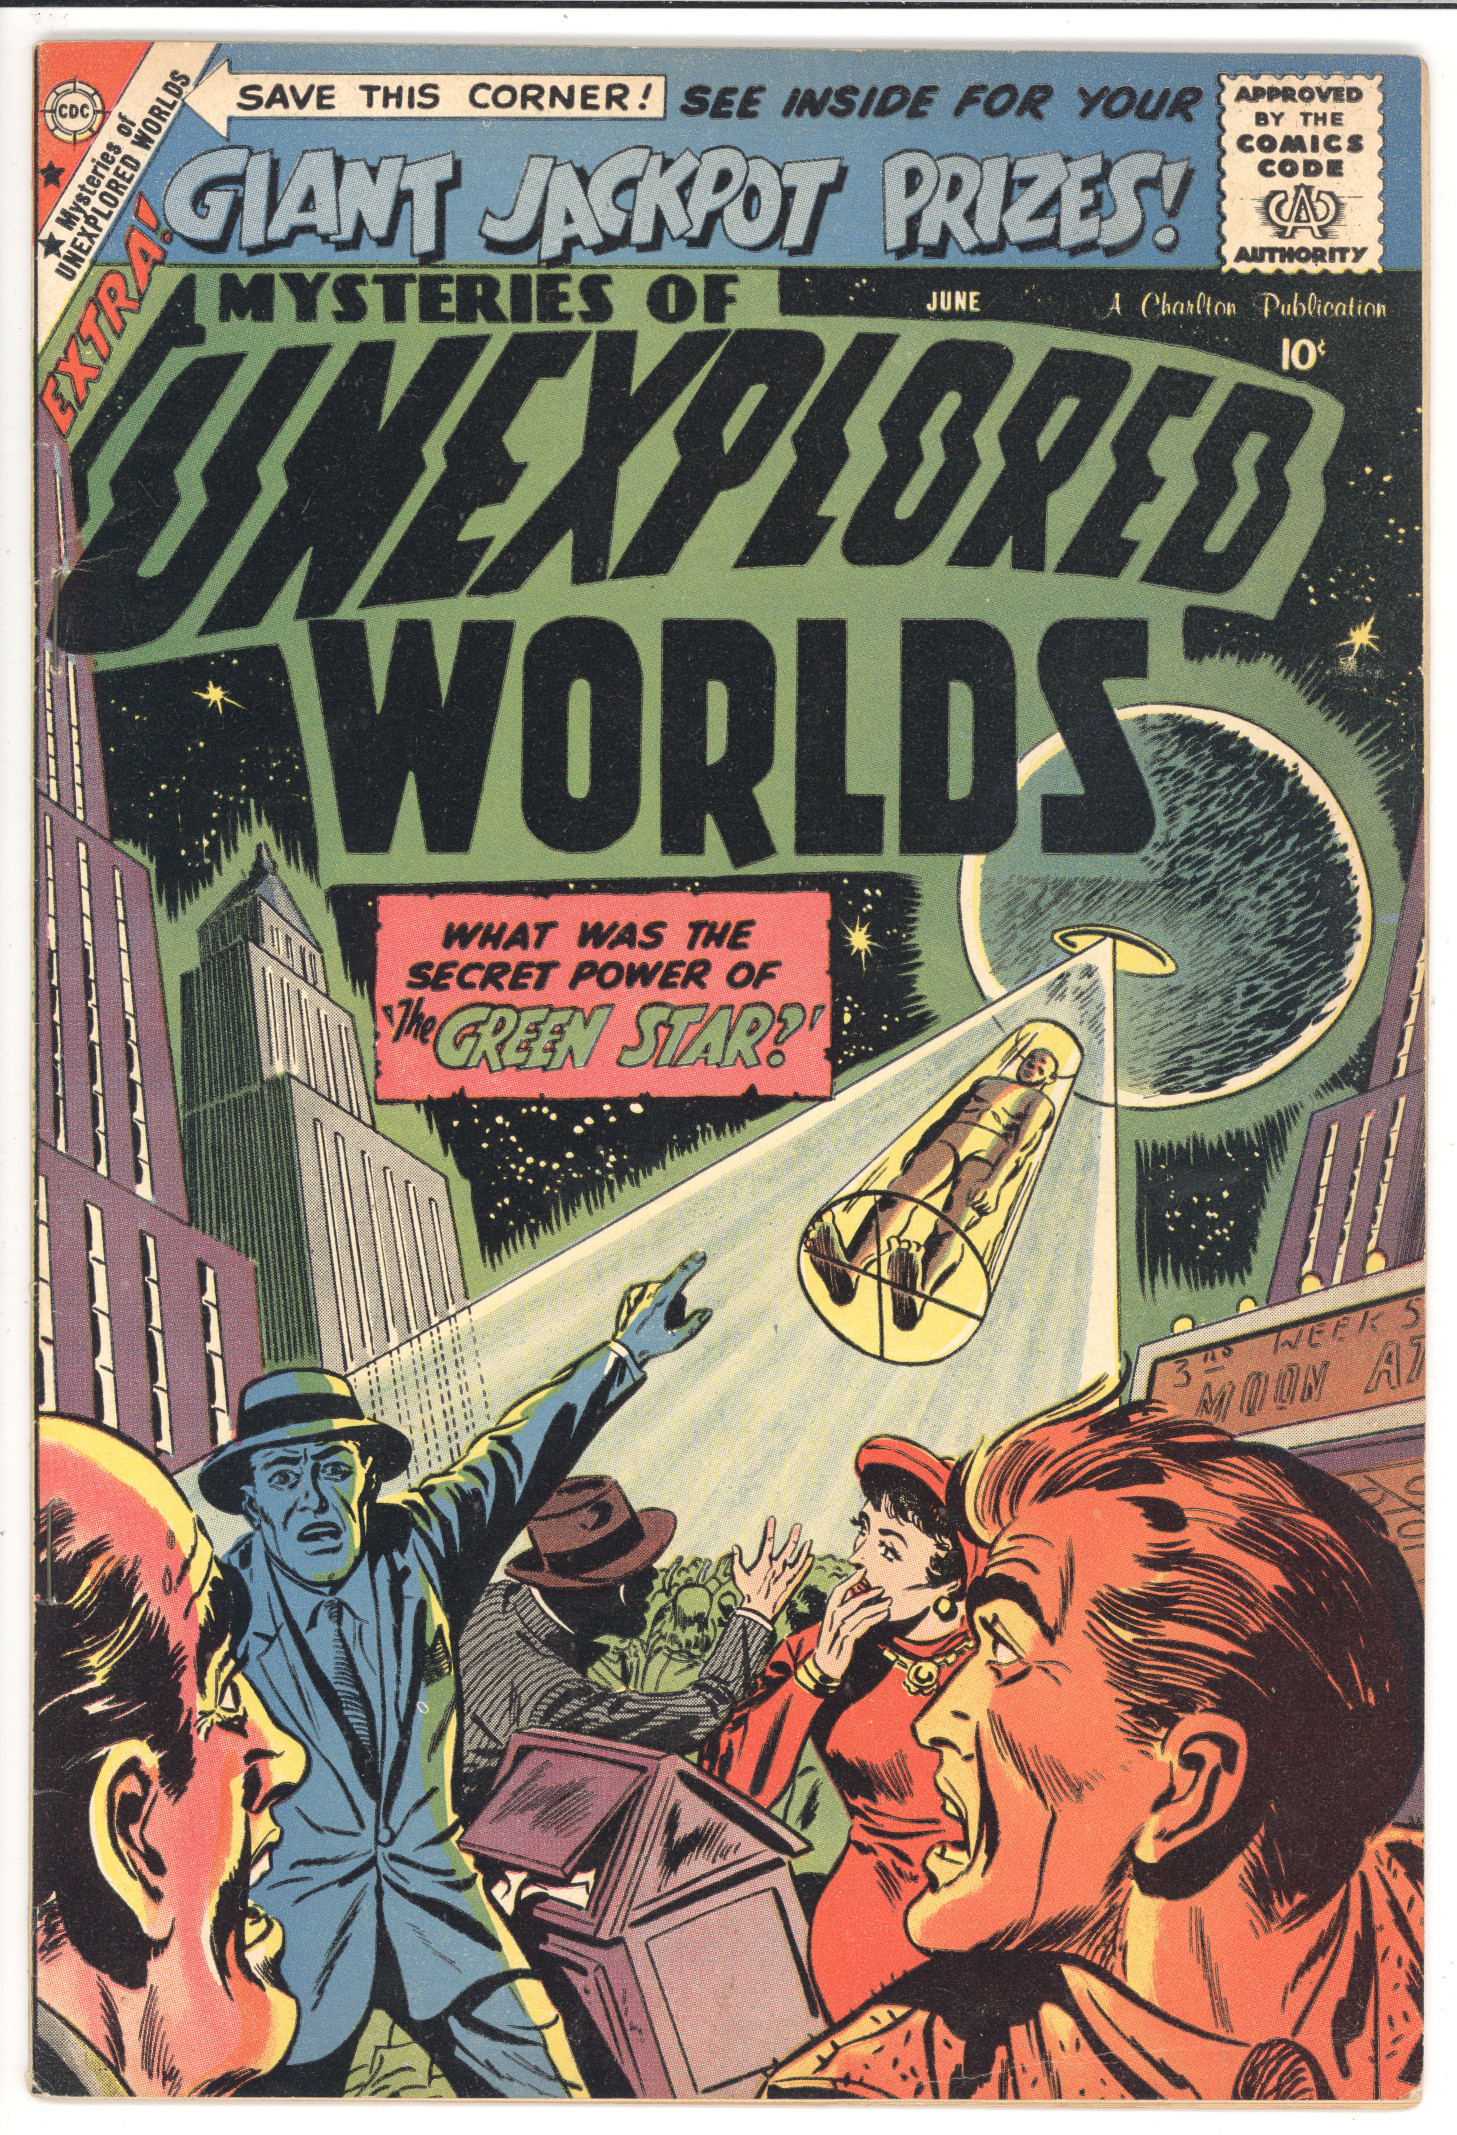 Mysteries of Unexplored Worlds #13 front